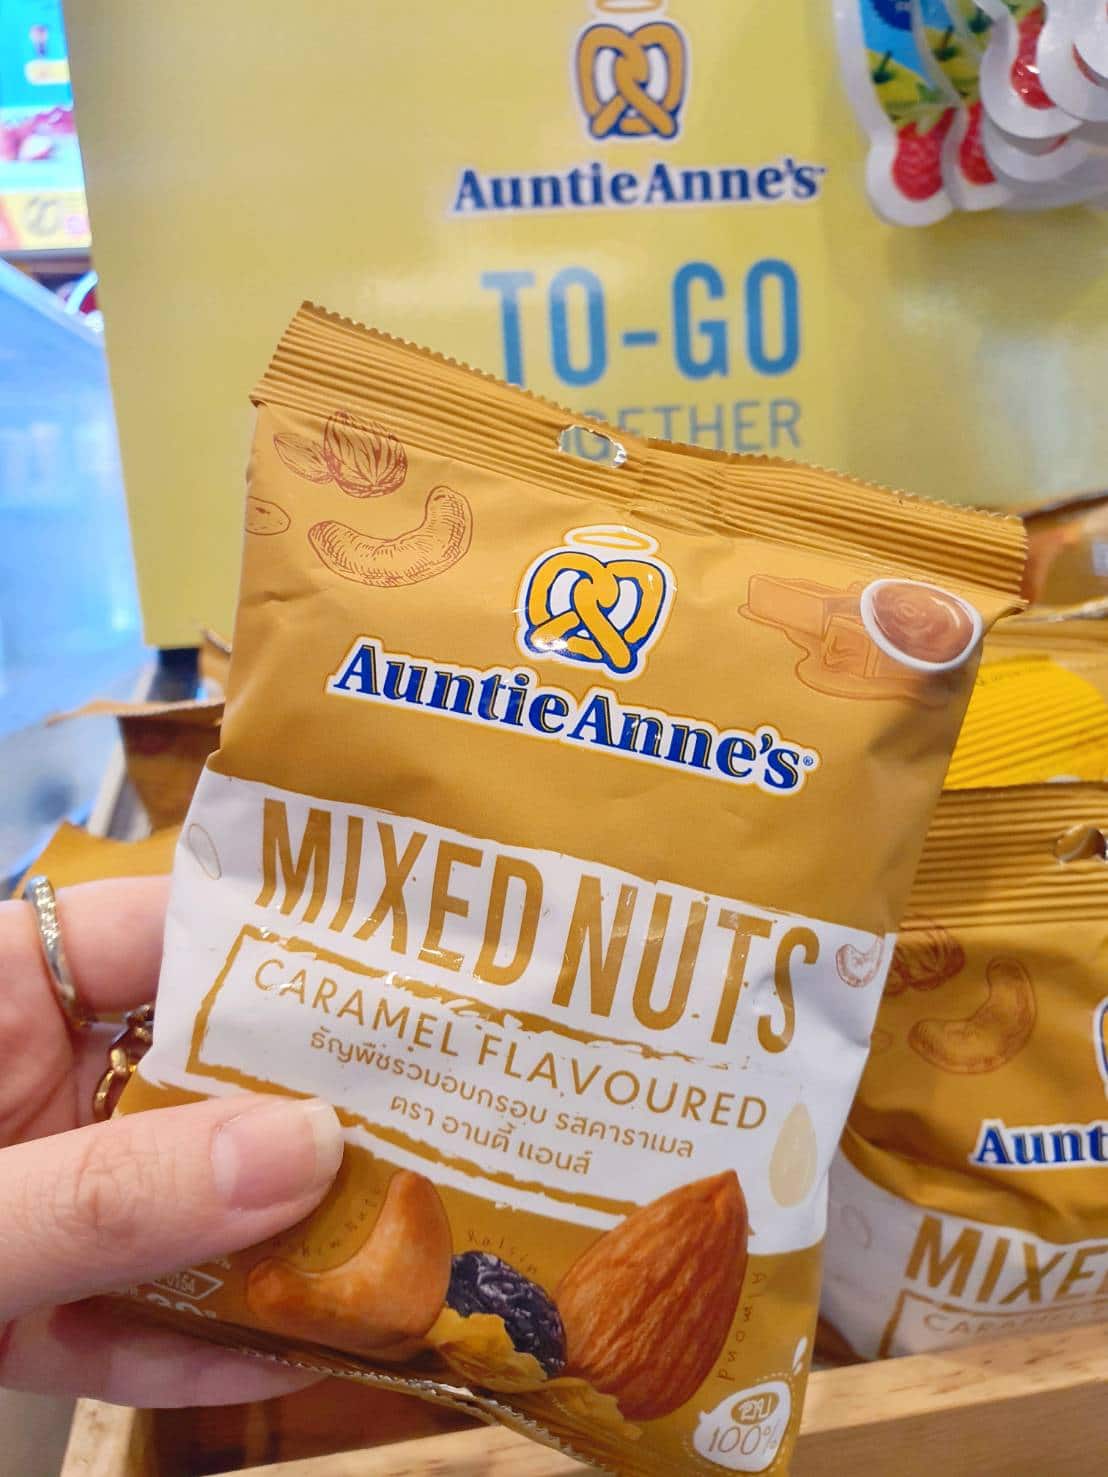 Auntie Anne's Mixed Nuts